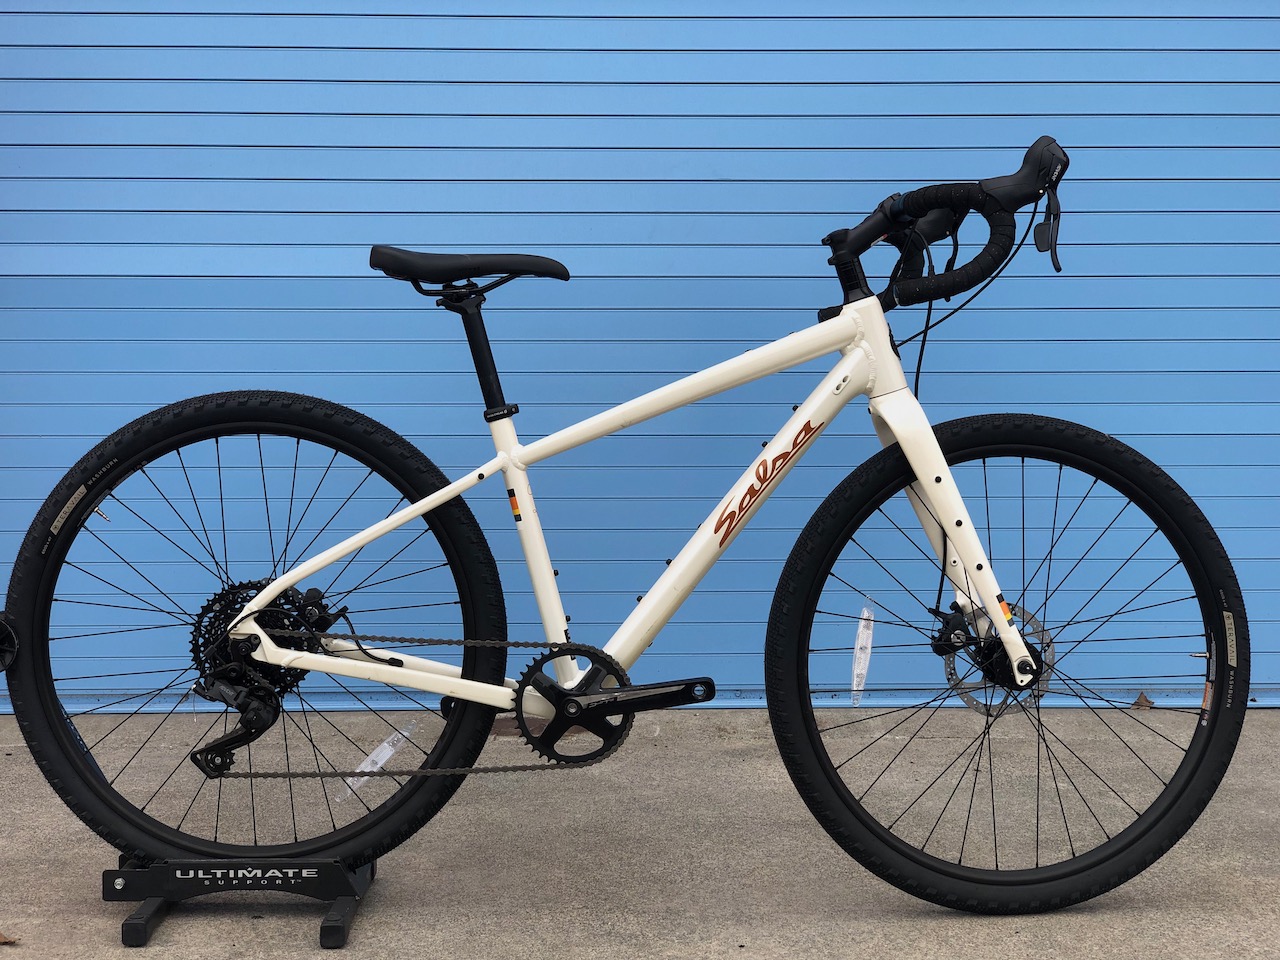 A photo of an off white size 55 cm Salsa Journeyer gravel bike that is offered on consignment.